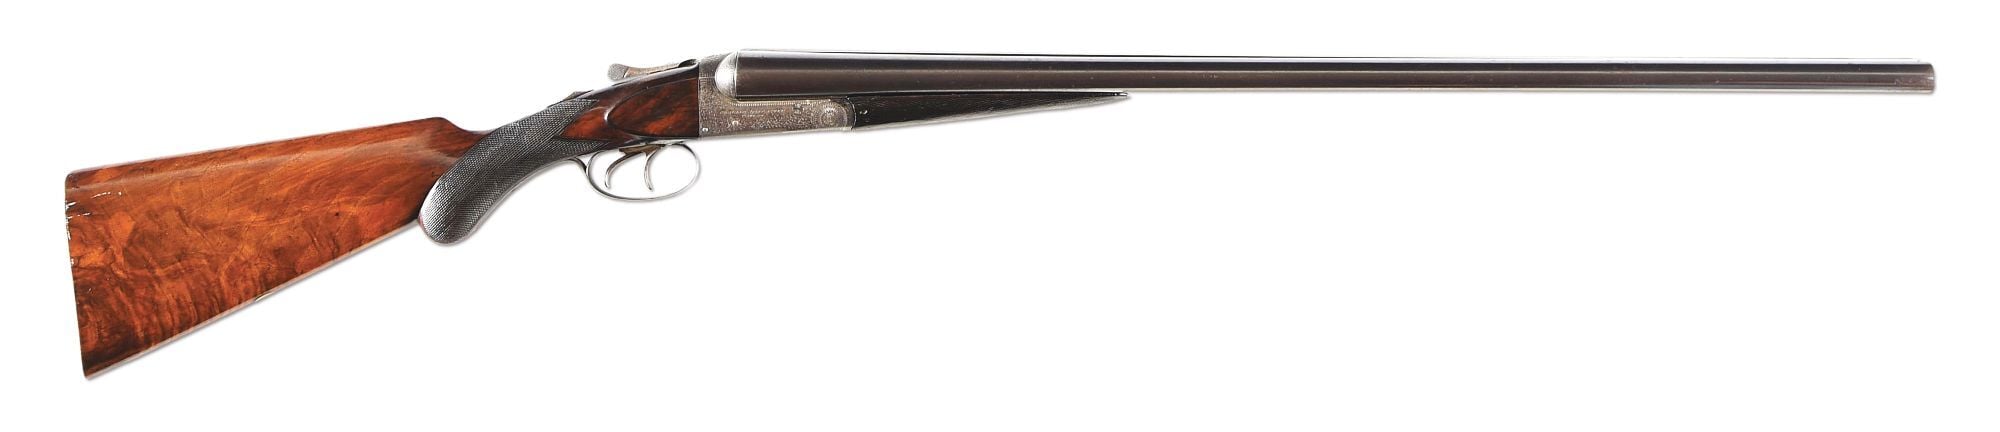 Shotgun Owned By Annie Oakley Sold For 258k At Recent Morphy Auctions Sale Entertainment